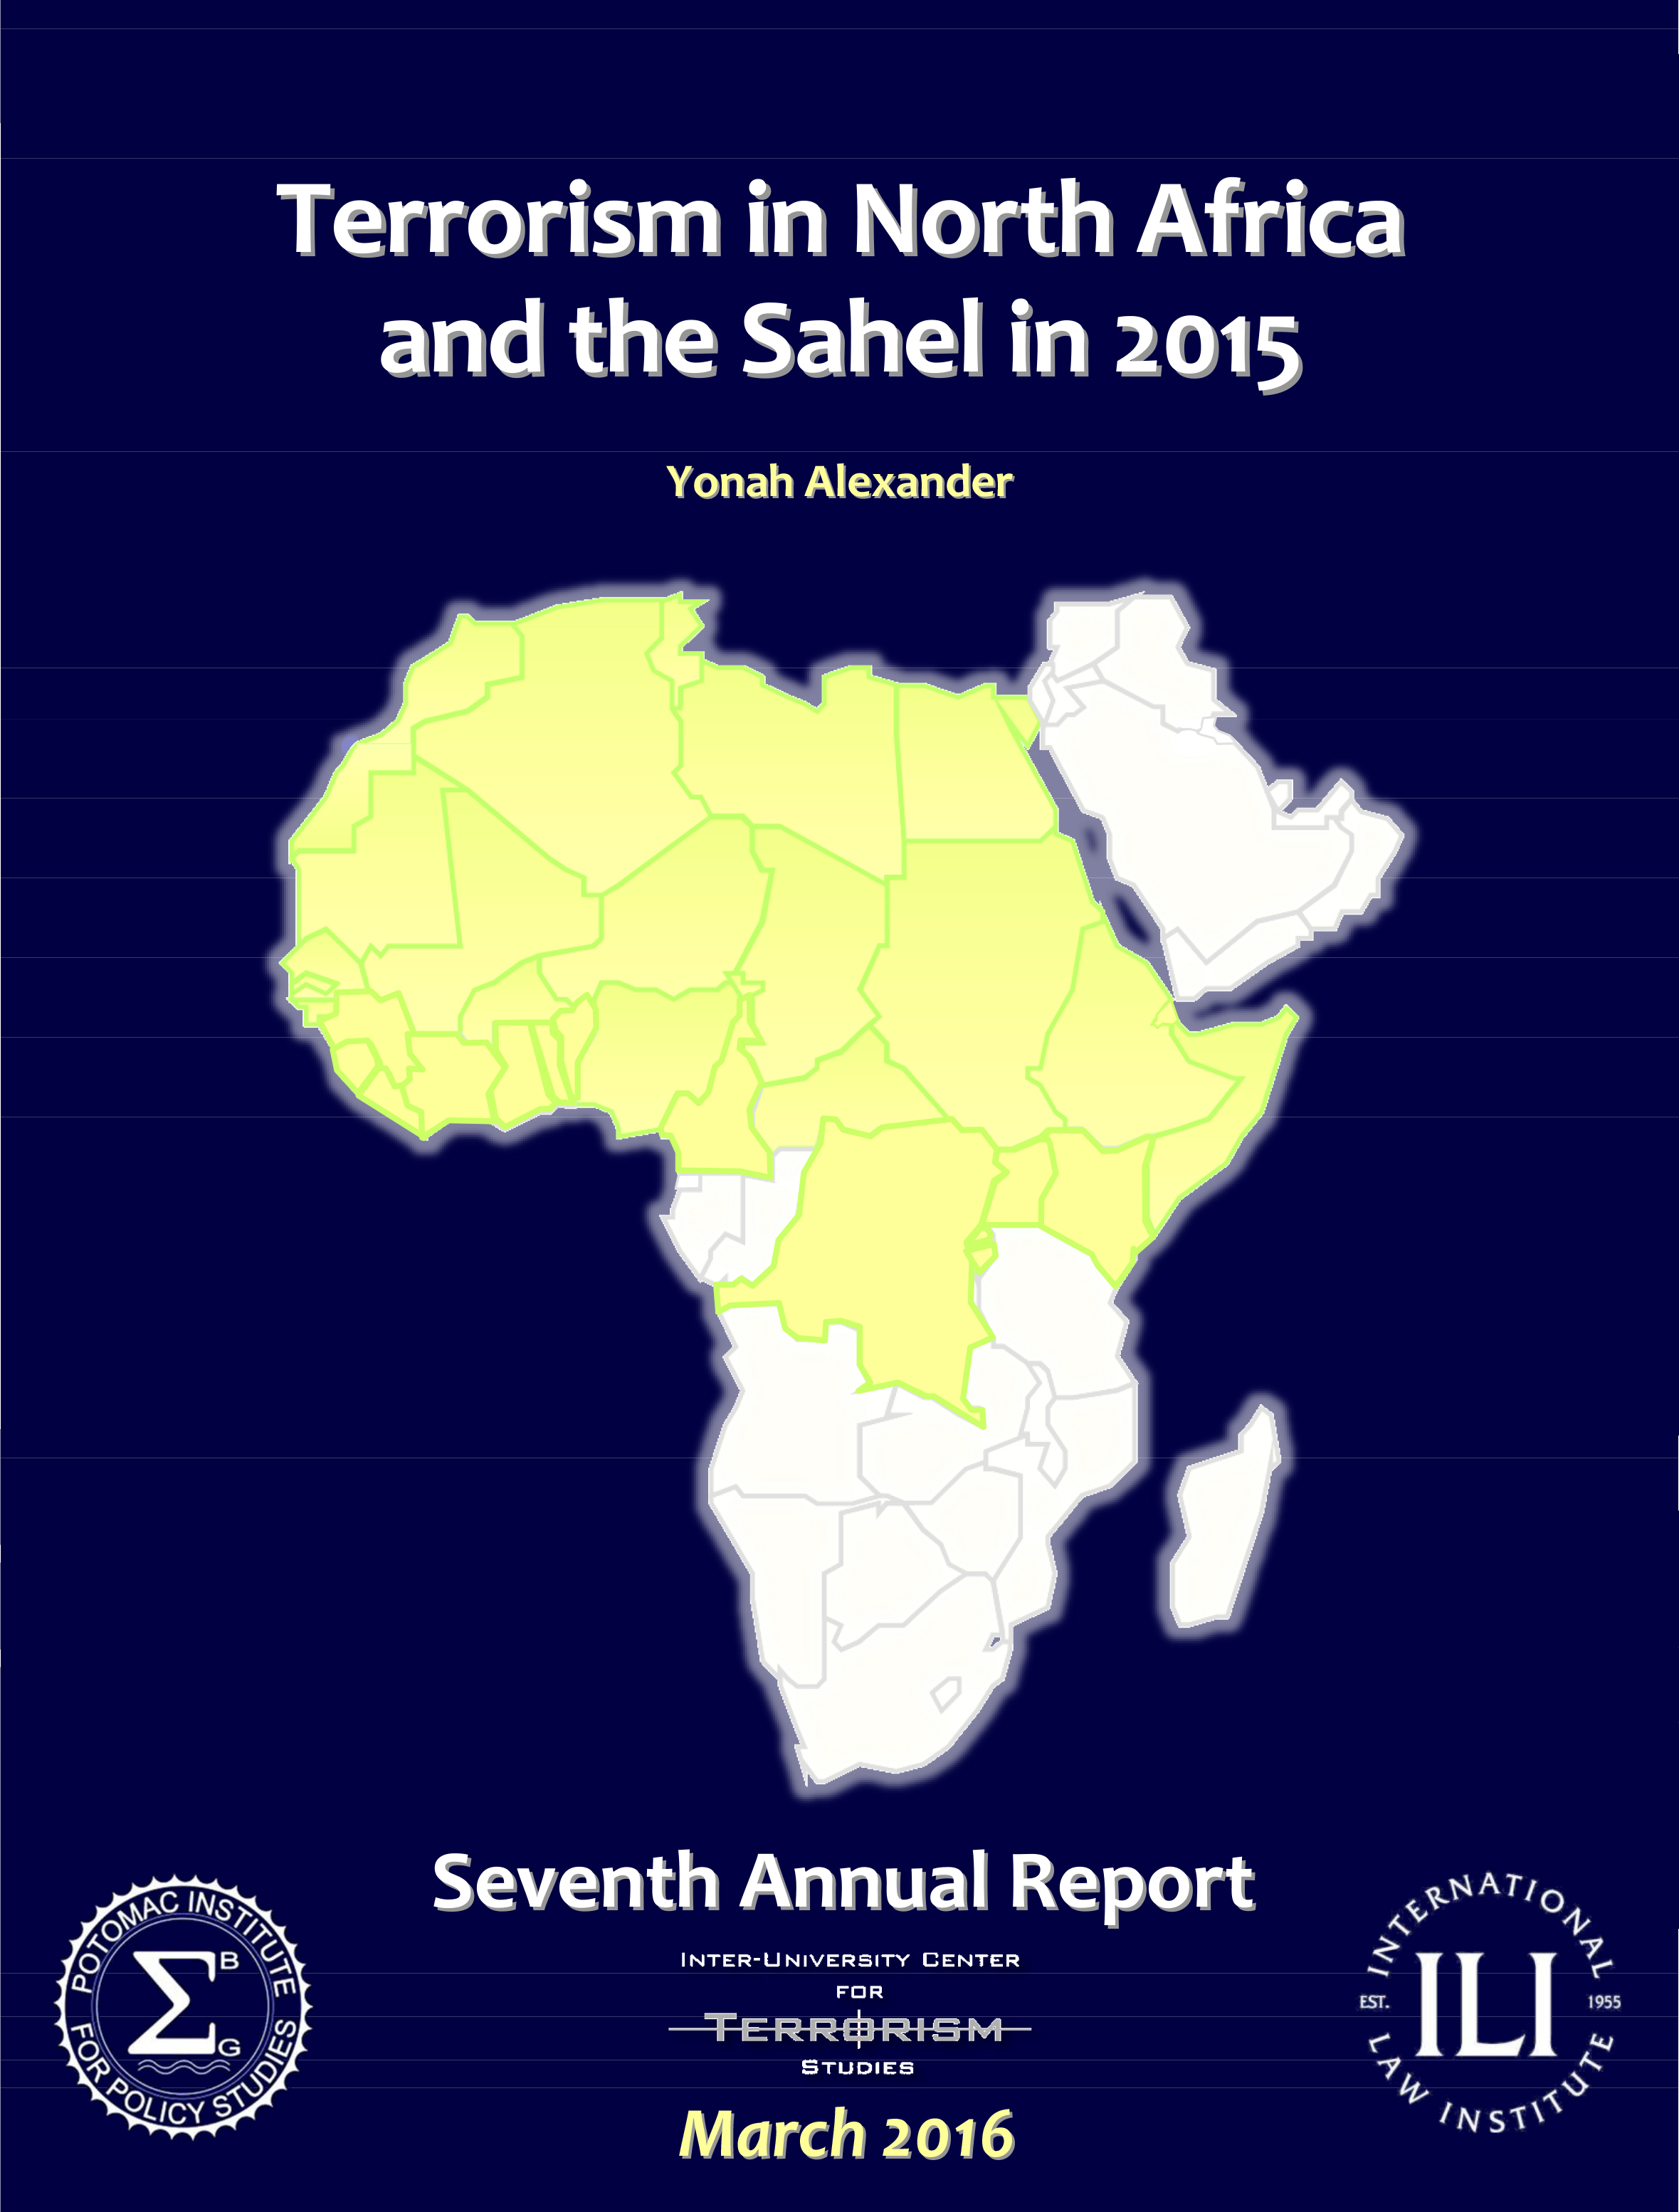 Terrorism in North Africa and the Sahel in 2015